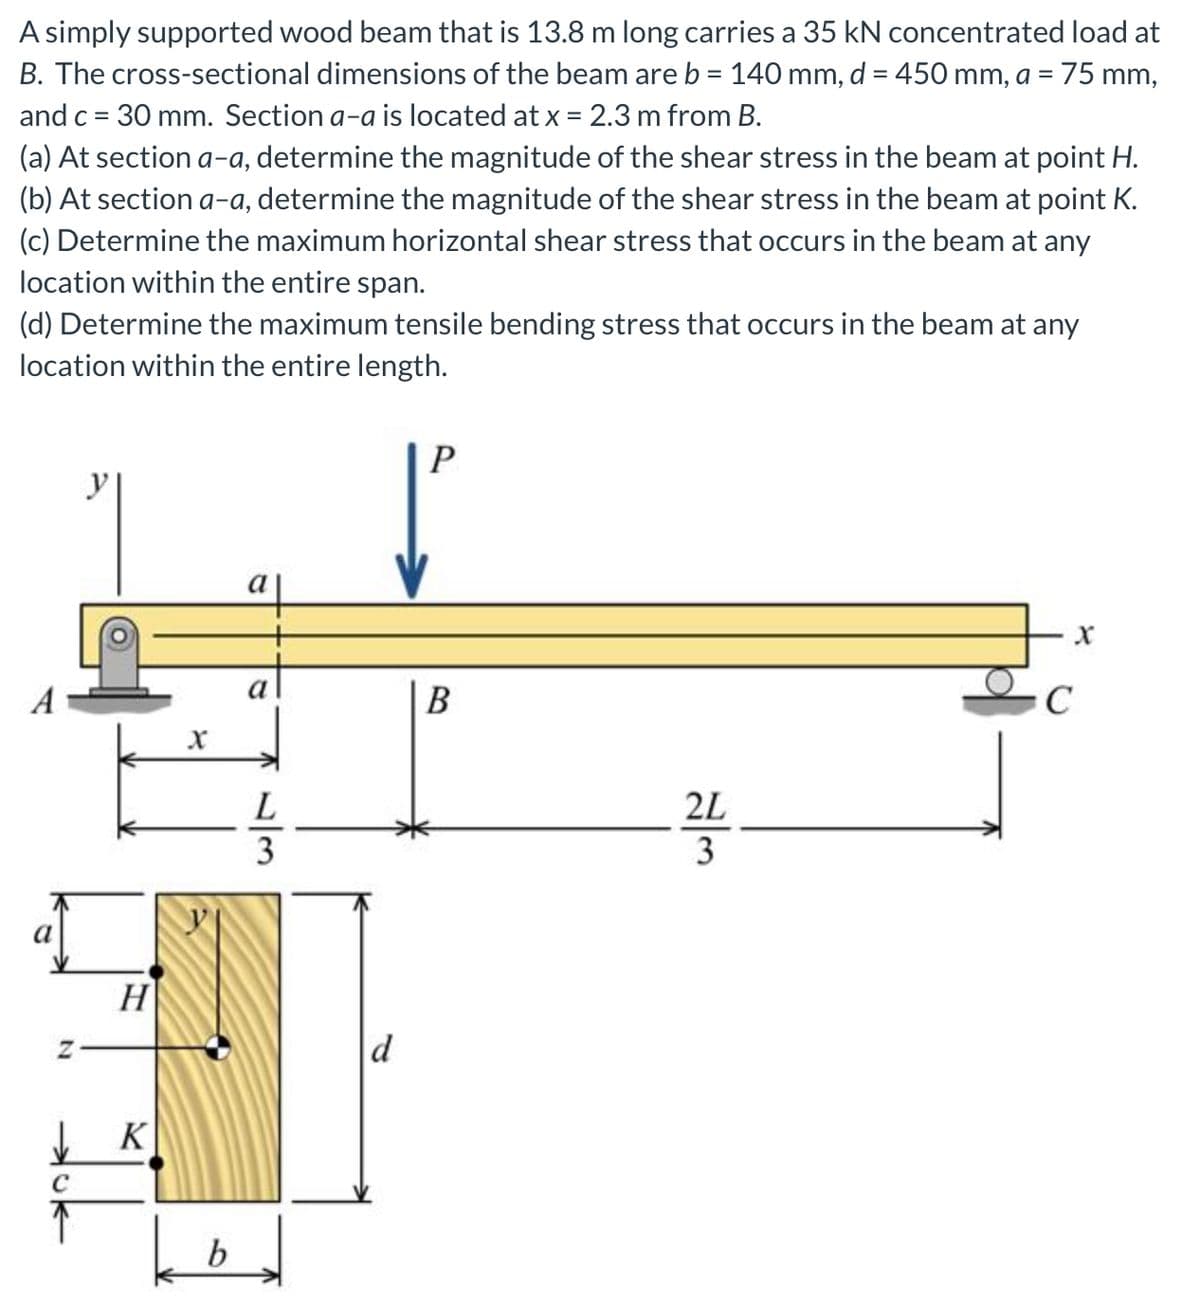 A simply supported wood beam that is 13.8 m long carries a 35 kN concentrated load at
B. The cross-sectional dimensions of the beam are b = 140 mm, d = 450 mm, a =
75 mm,
and c = 30 mm. Section a-a is located at x = 2.3 m from B.
%3D
(a) At section a-a, determine the magnitude of the shear stress in the beam at point H.
(b) At section a-a, determine the magnitude of the shear stress in the beam at point K.
(c) Determine the maximum horizontal shear stress that occurs in the beam at any
location within the entire span.
(d) Determine the maximum tensile bending stress that occurs in the beam at any
location within the entire length.
P
У
a
a
A
B
2L
3
H
d
b
/3
